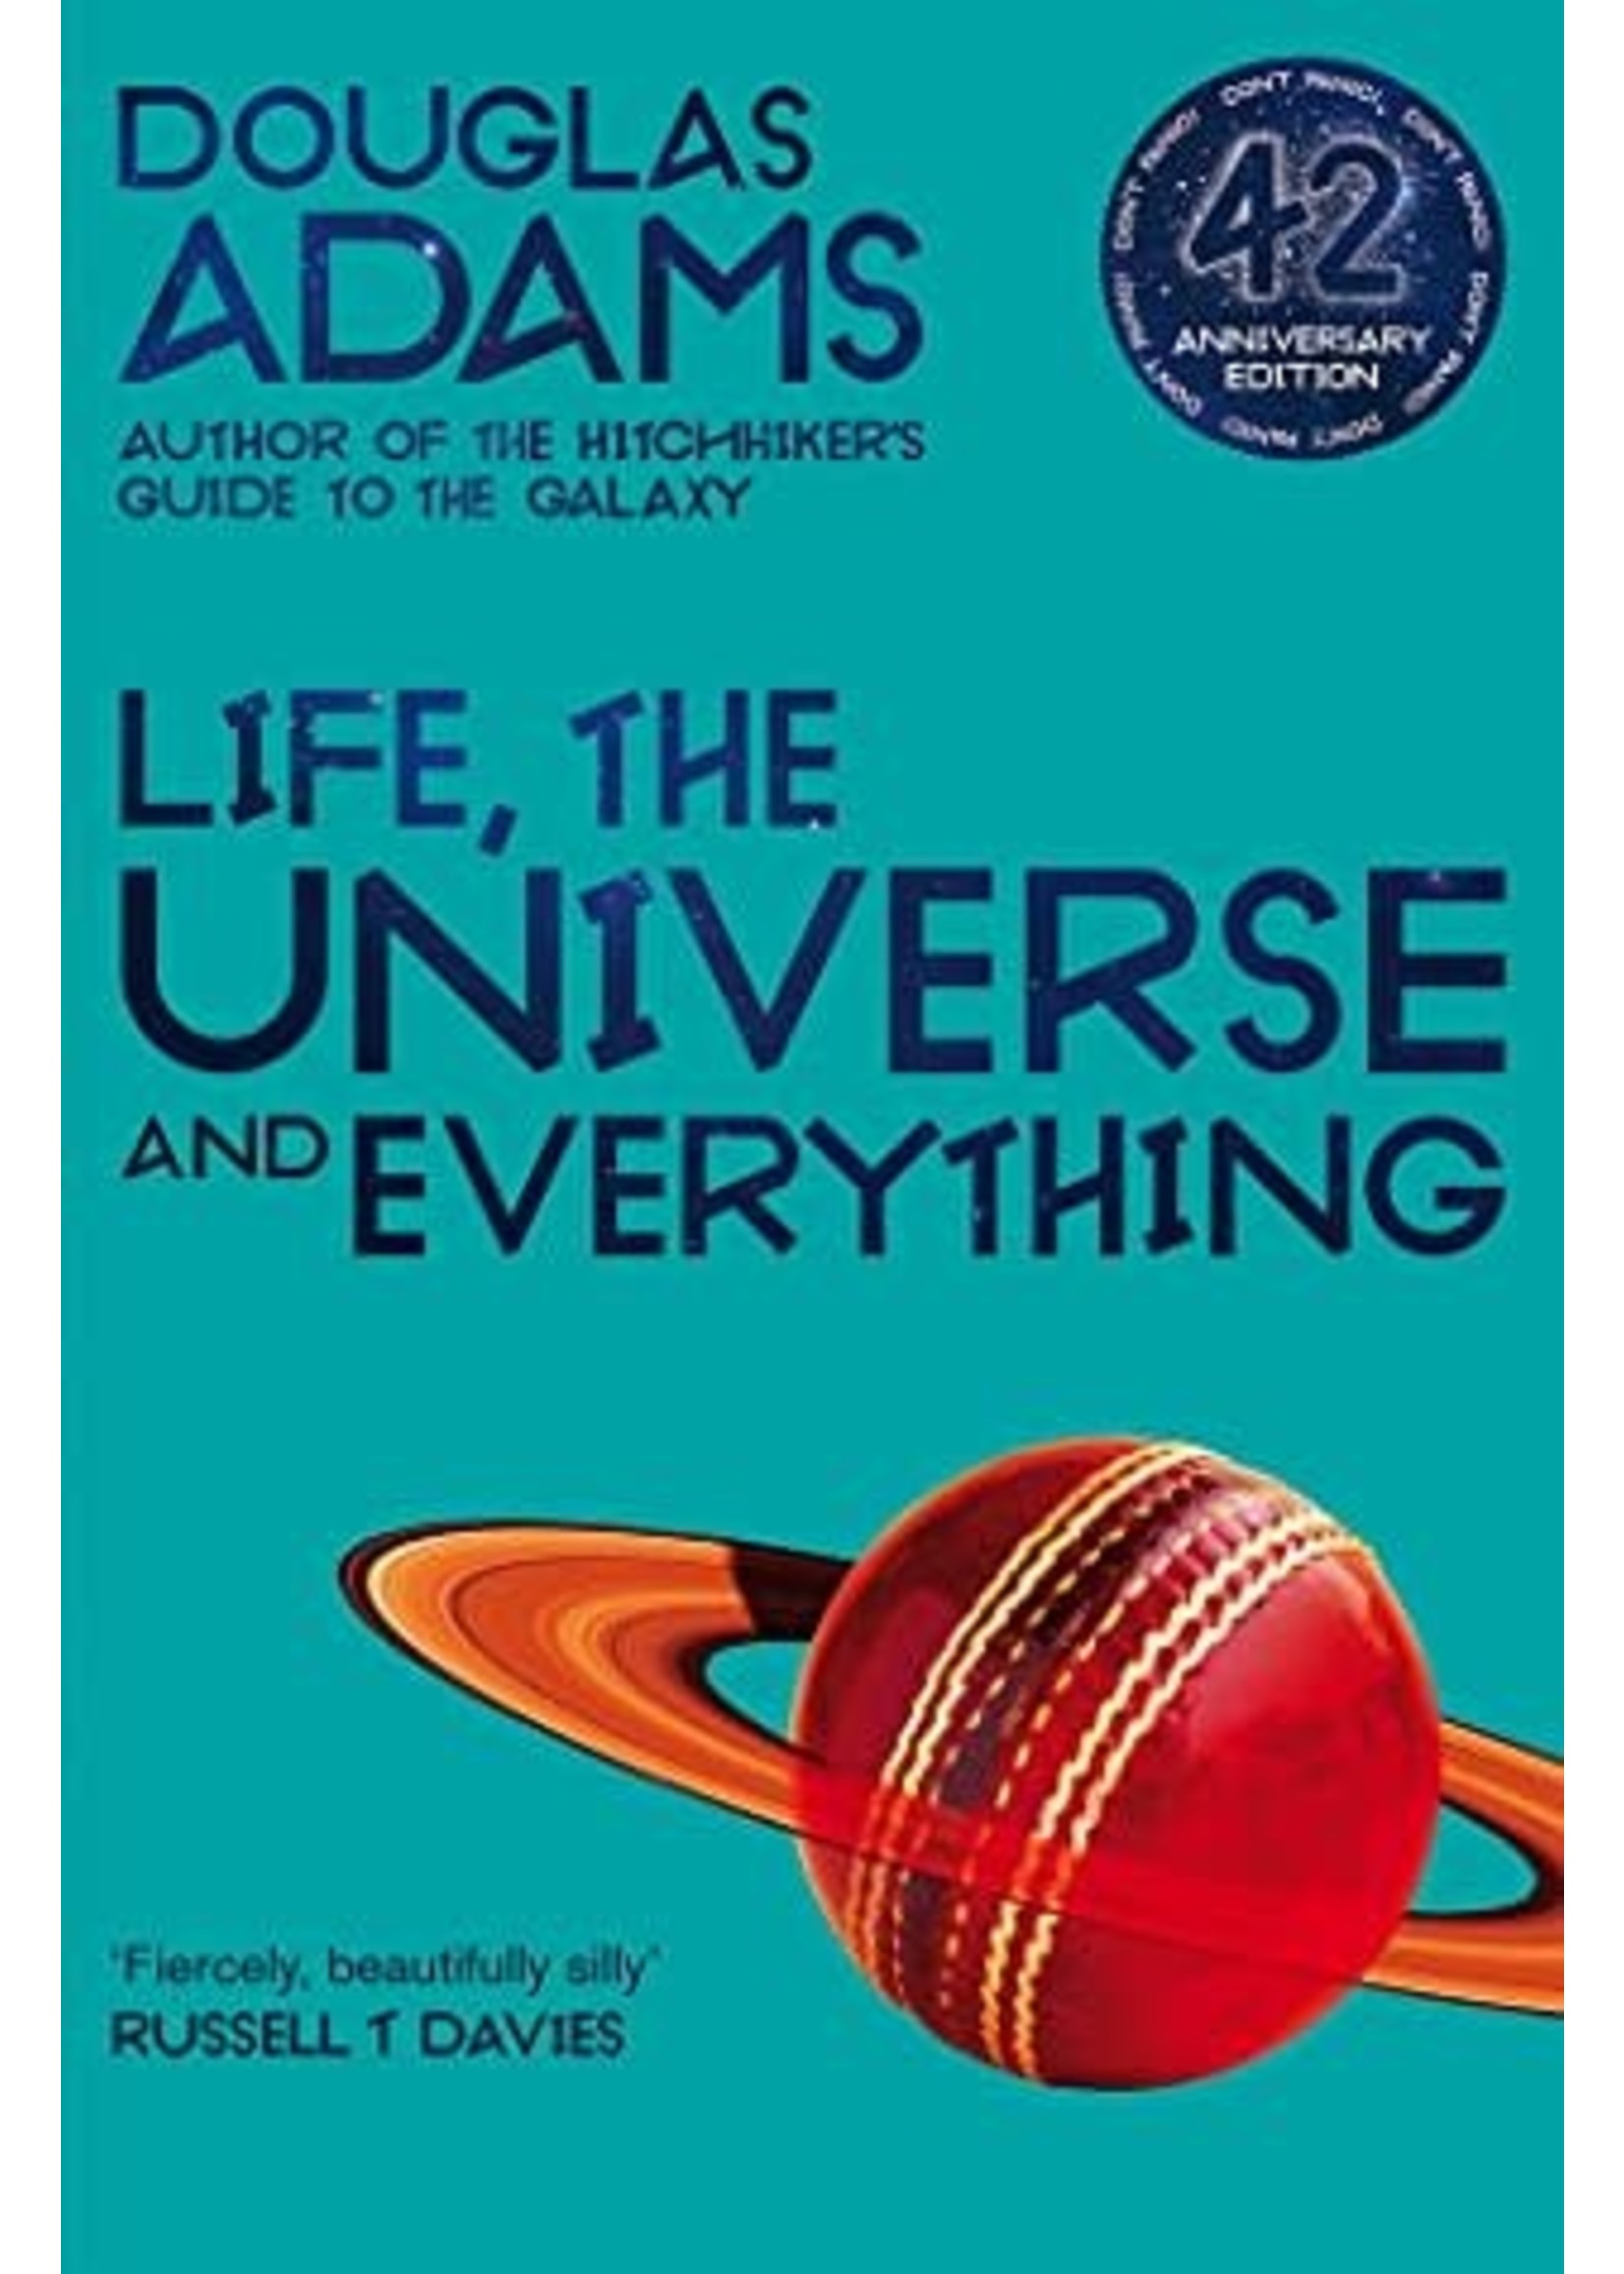 Life, the Universe and Everything (Hitchhiker's Guide to the Galaxy, #3) by Douglas Adams